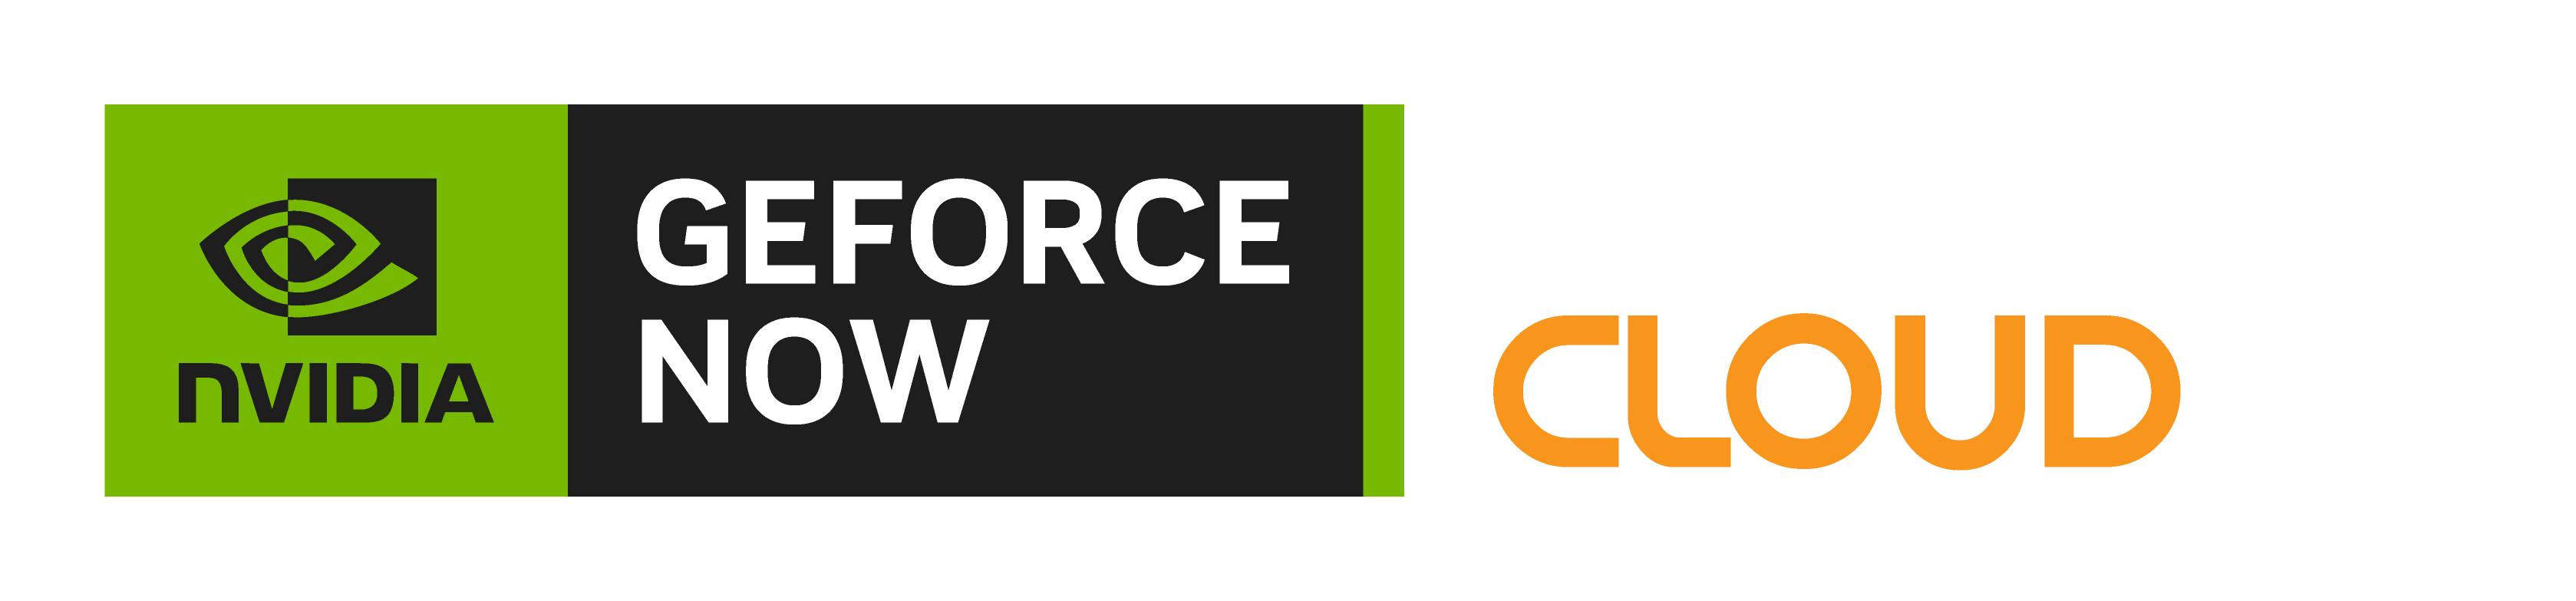 GeForce NOW Powered by CloudGG